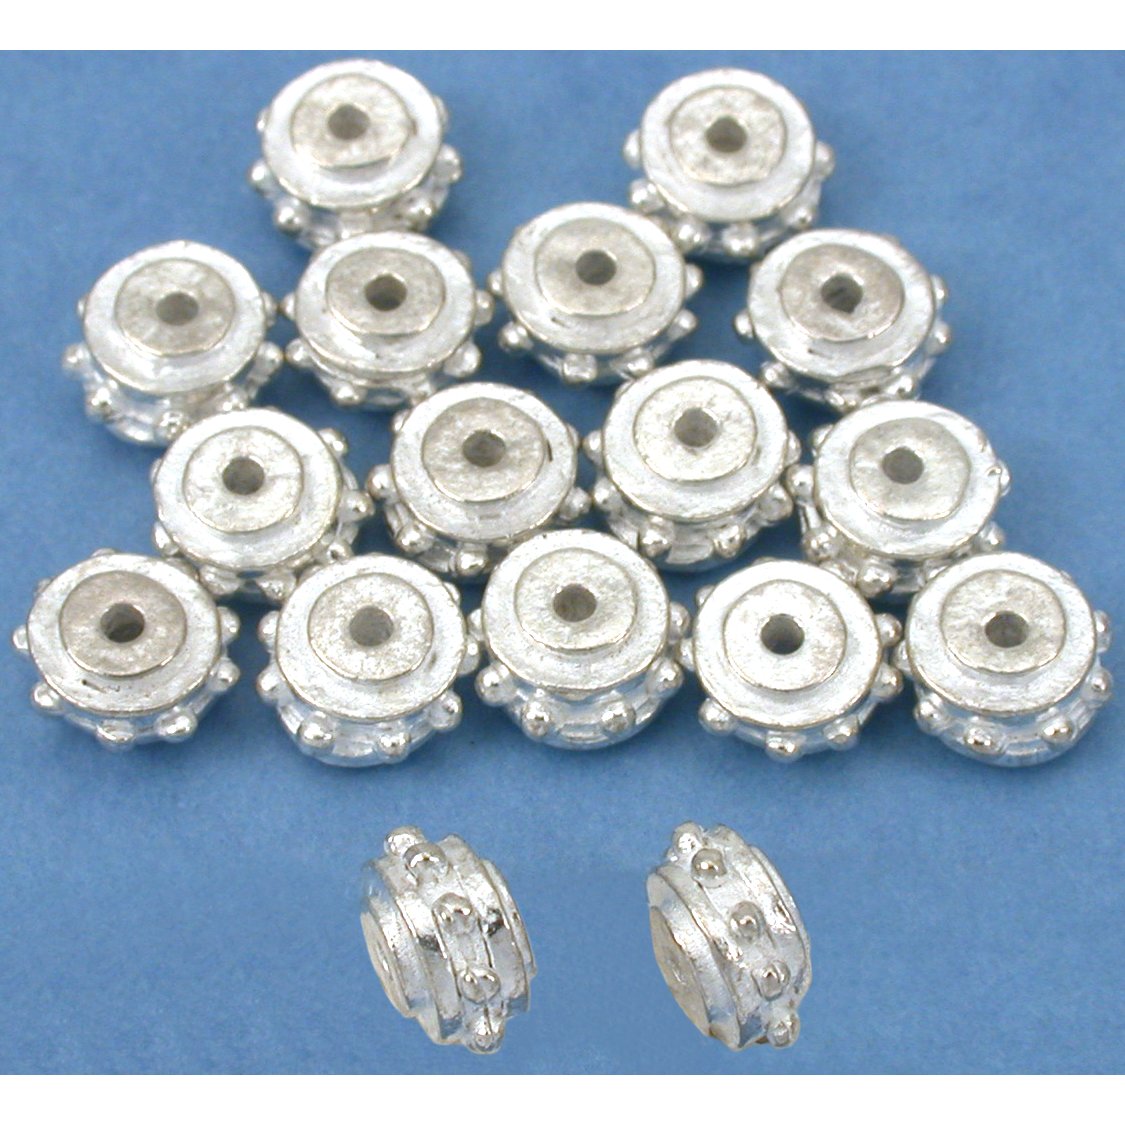 Bali Spacer Beads Silver Plated 8mm 15Pcs Approx.